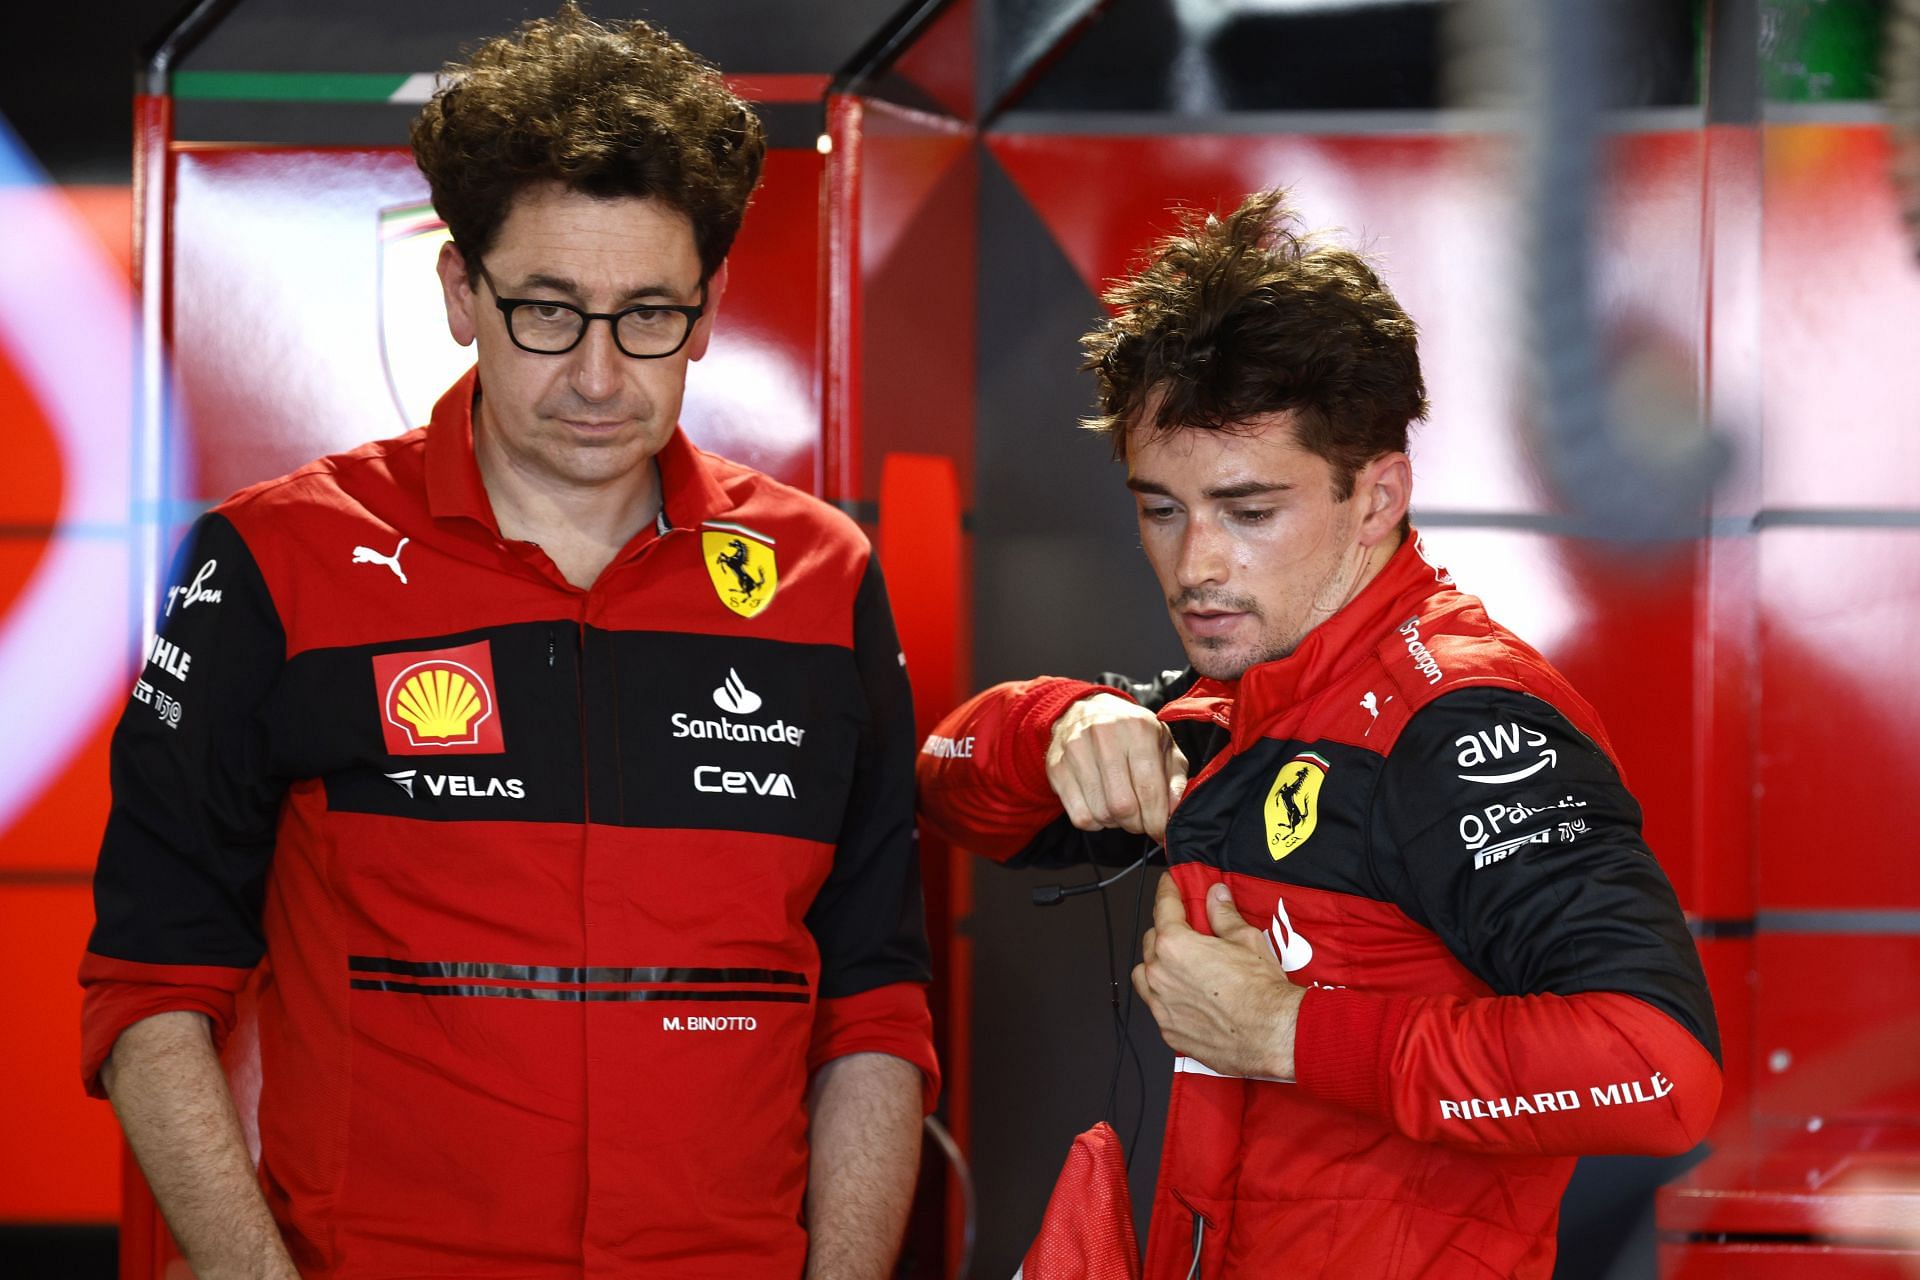 The Ferrari boss admitted that the team needed to do a better job